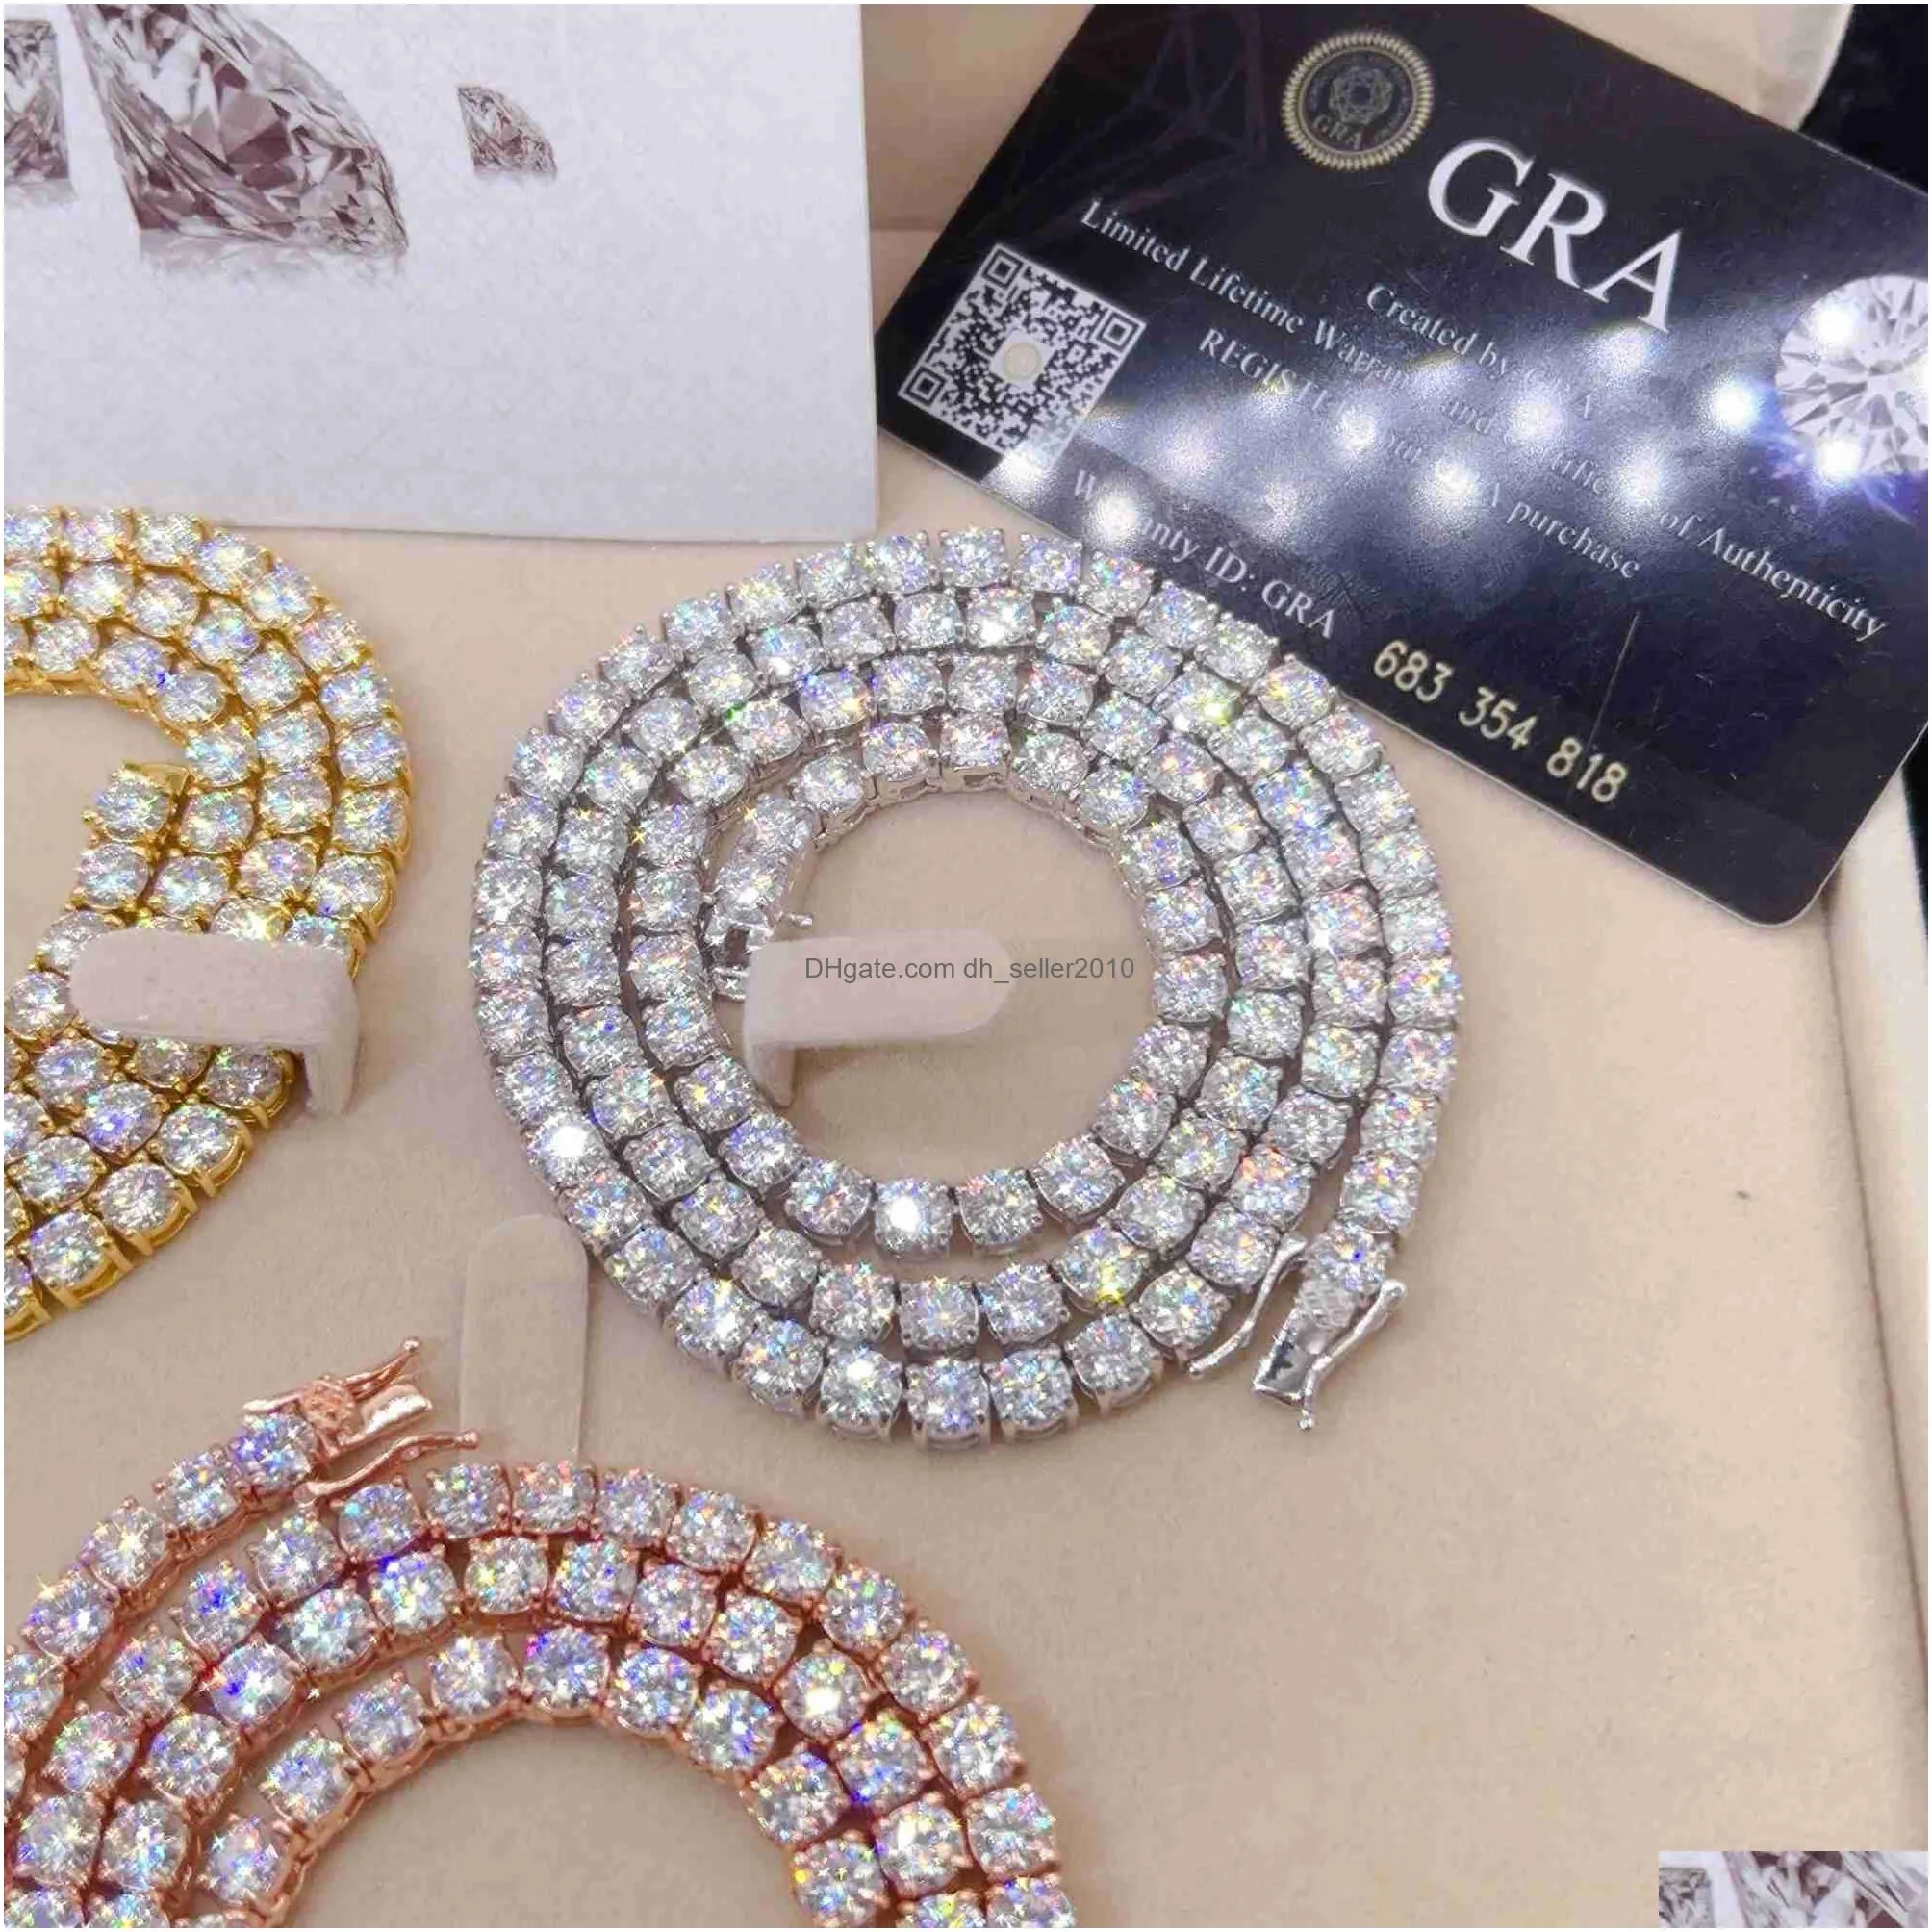 Other Jewelry Designer Good Price Gra Certified Vvs Moissanite 925 Sterling Sier Solid Gold Tennis Chain 2Z26 Drop Delivery Jewelry Ne Dheuw